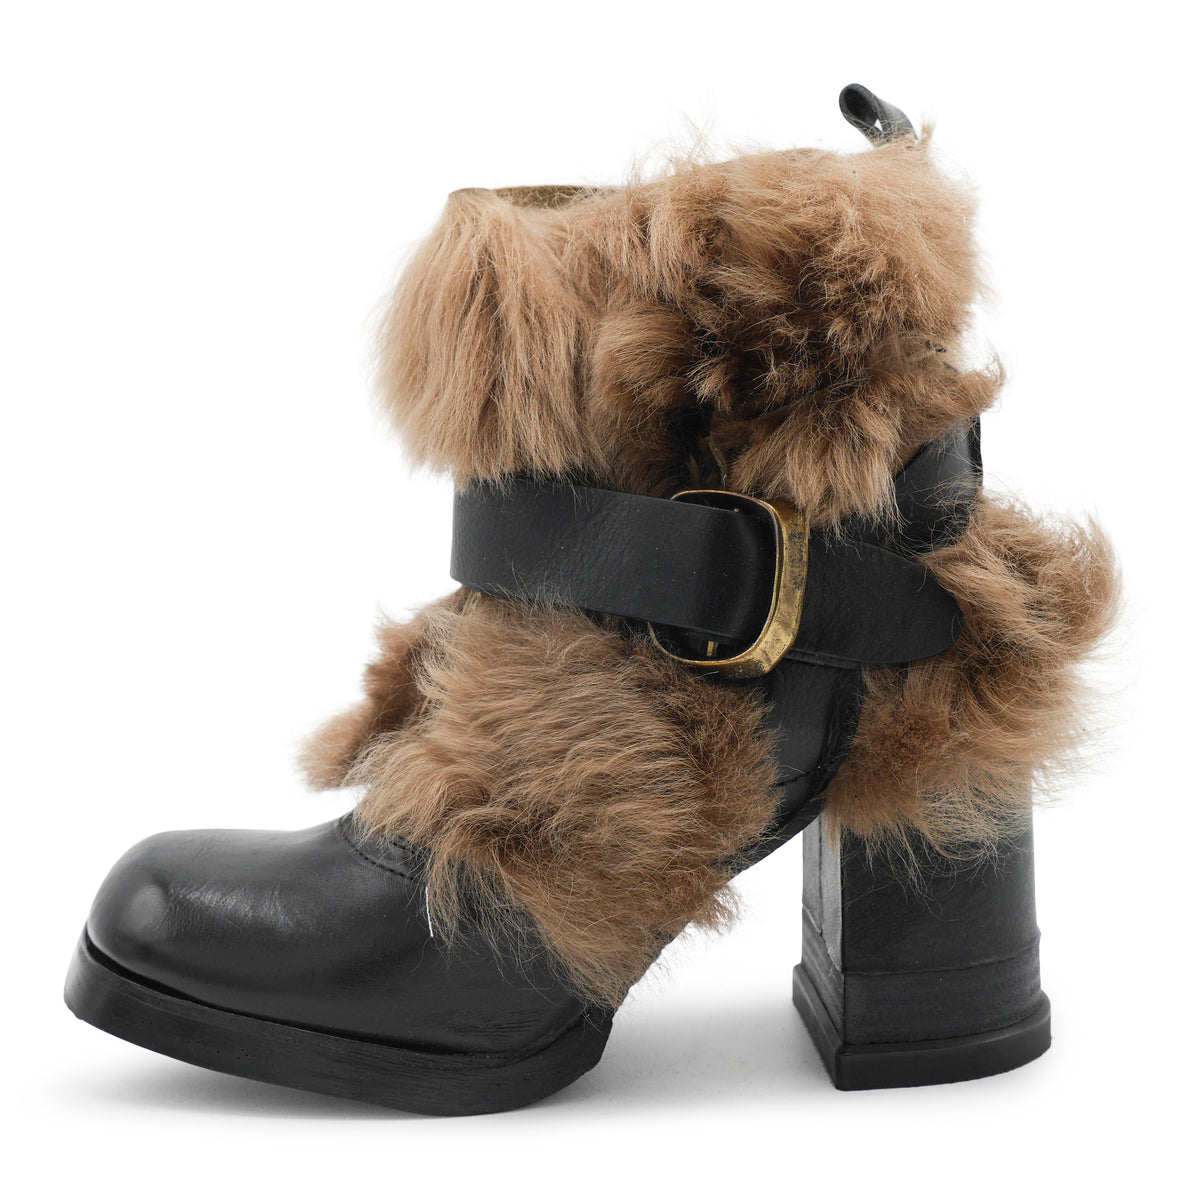 42206 - Black Leather Buckle Strap Boot With Fur